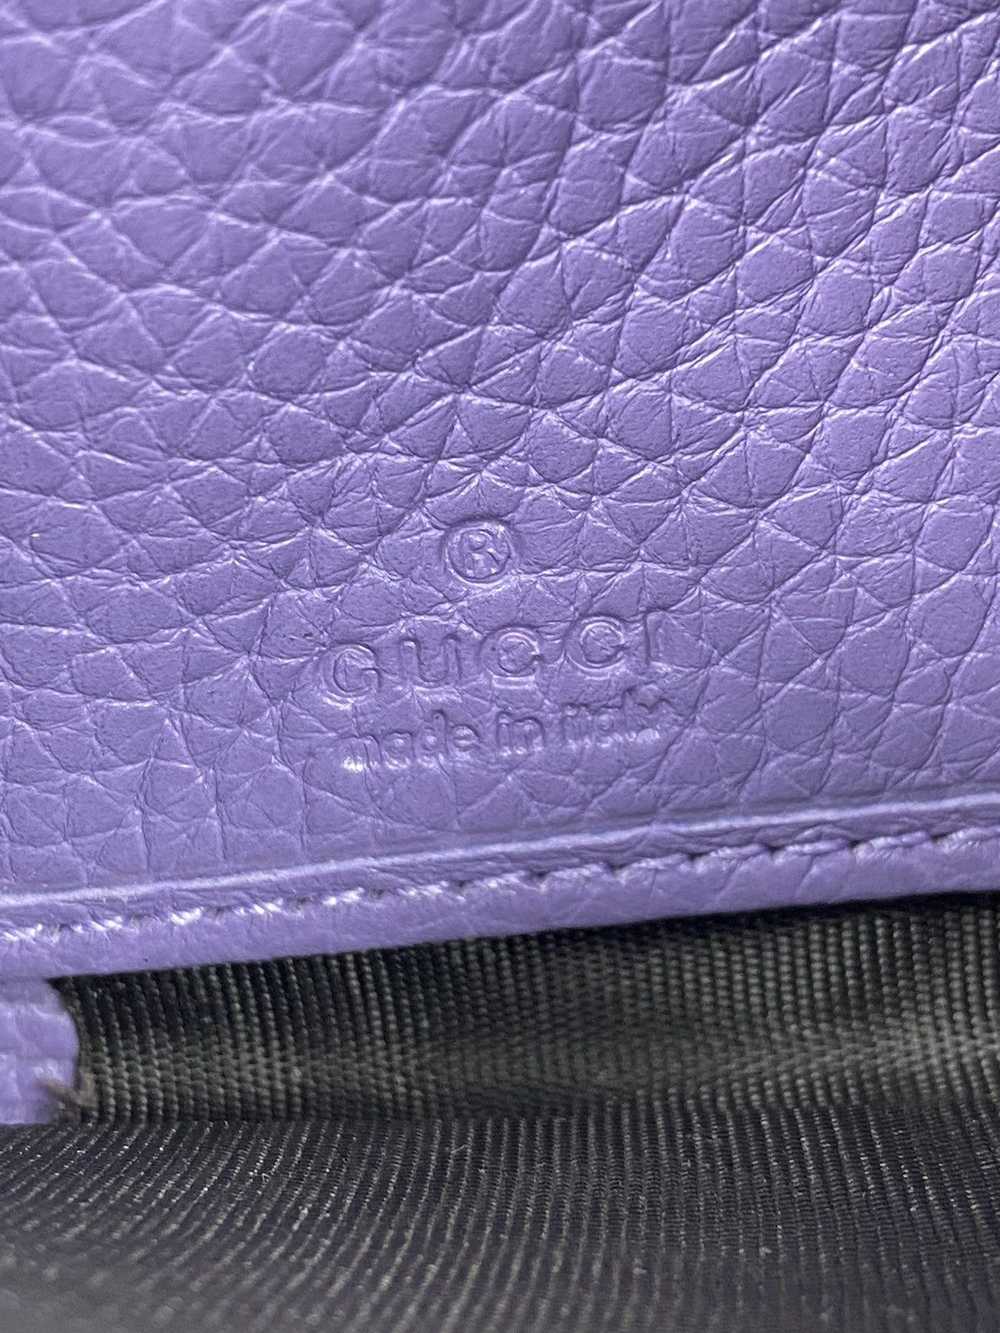 Gucci Gucci Bamboo leather zippy wallet - image 6